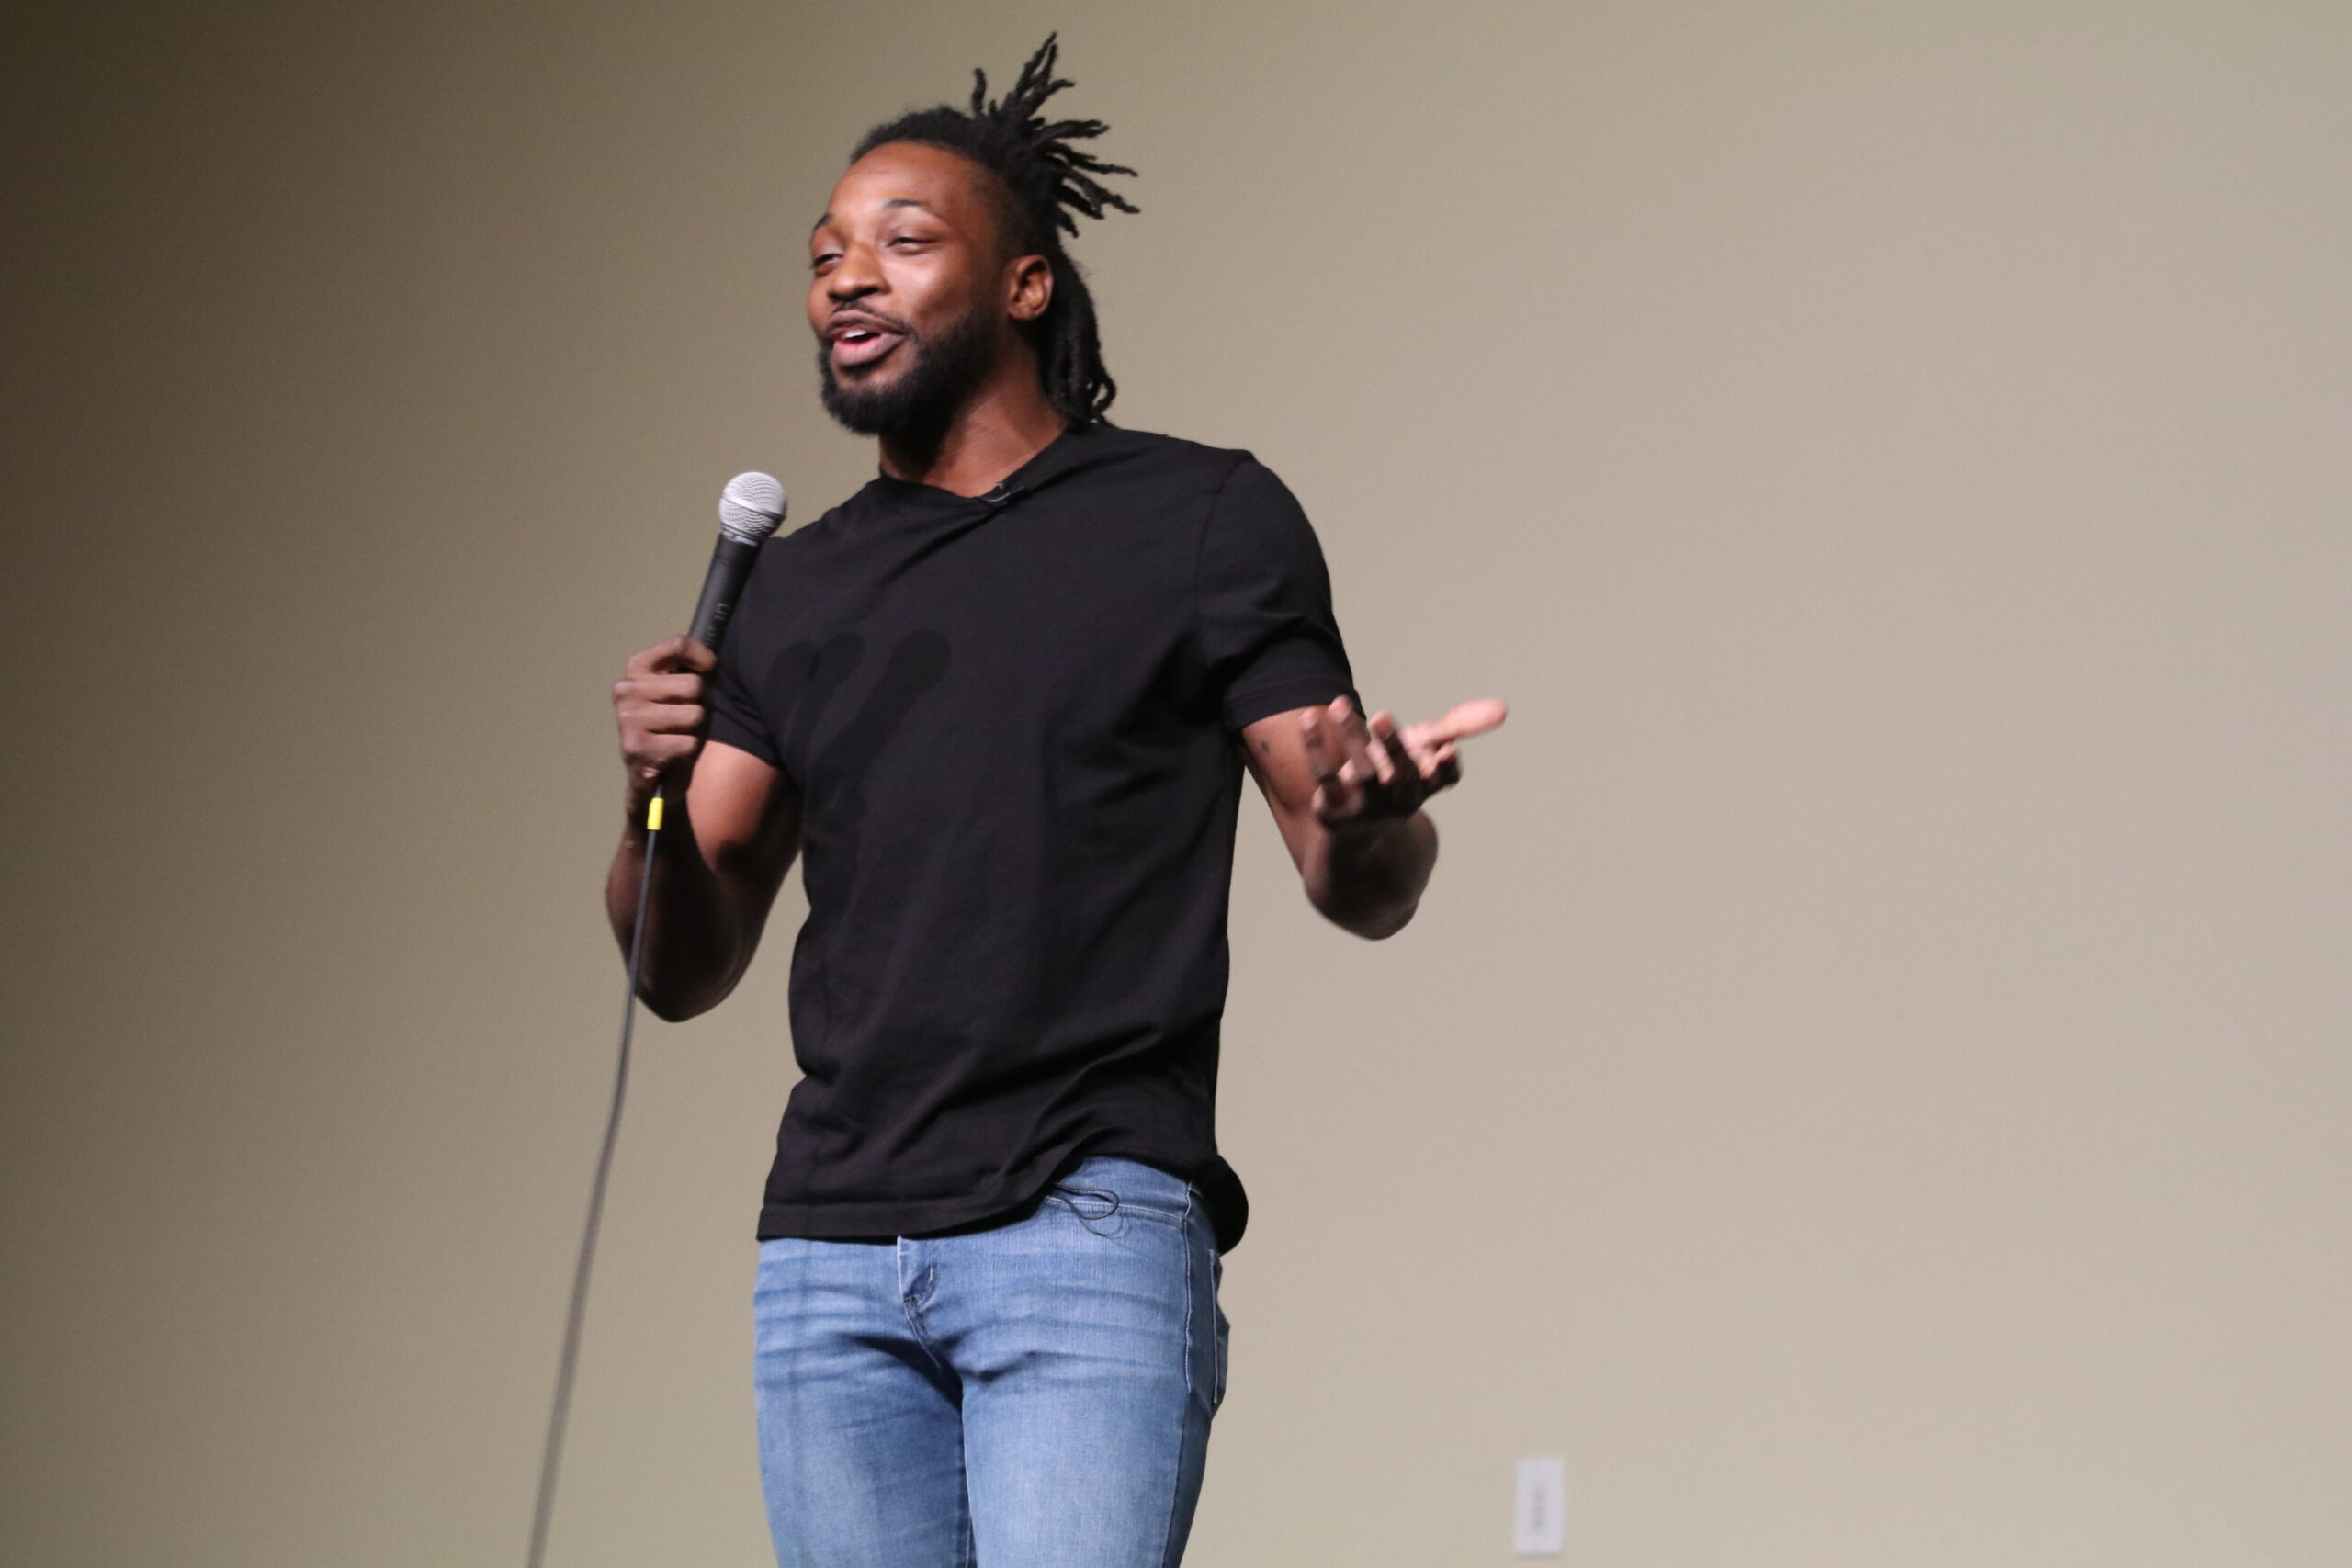 Preacher Lawson fires up crowd at Round Up Comedy Show